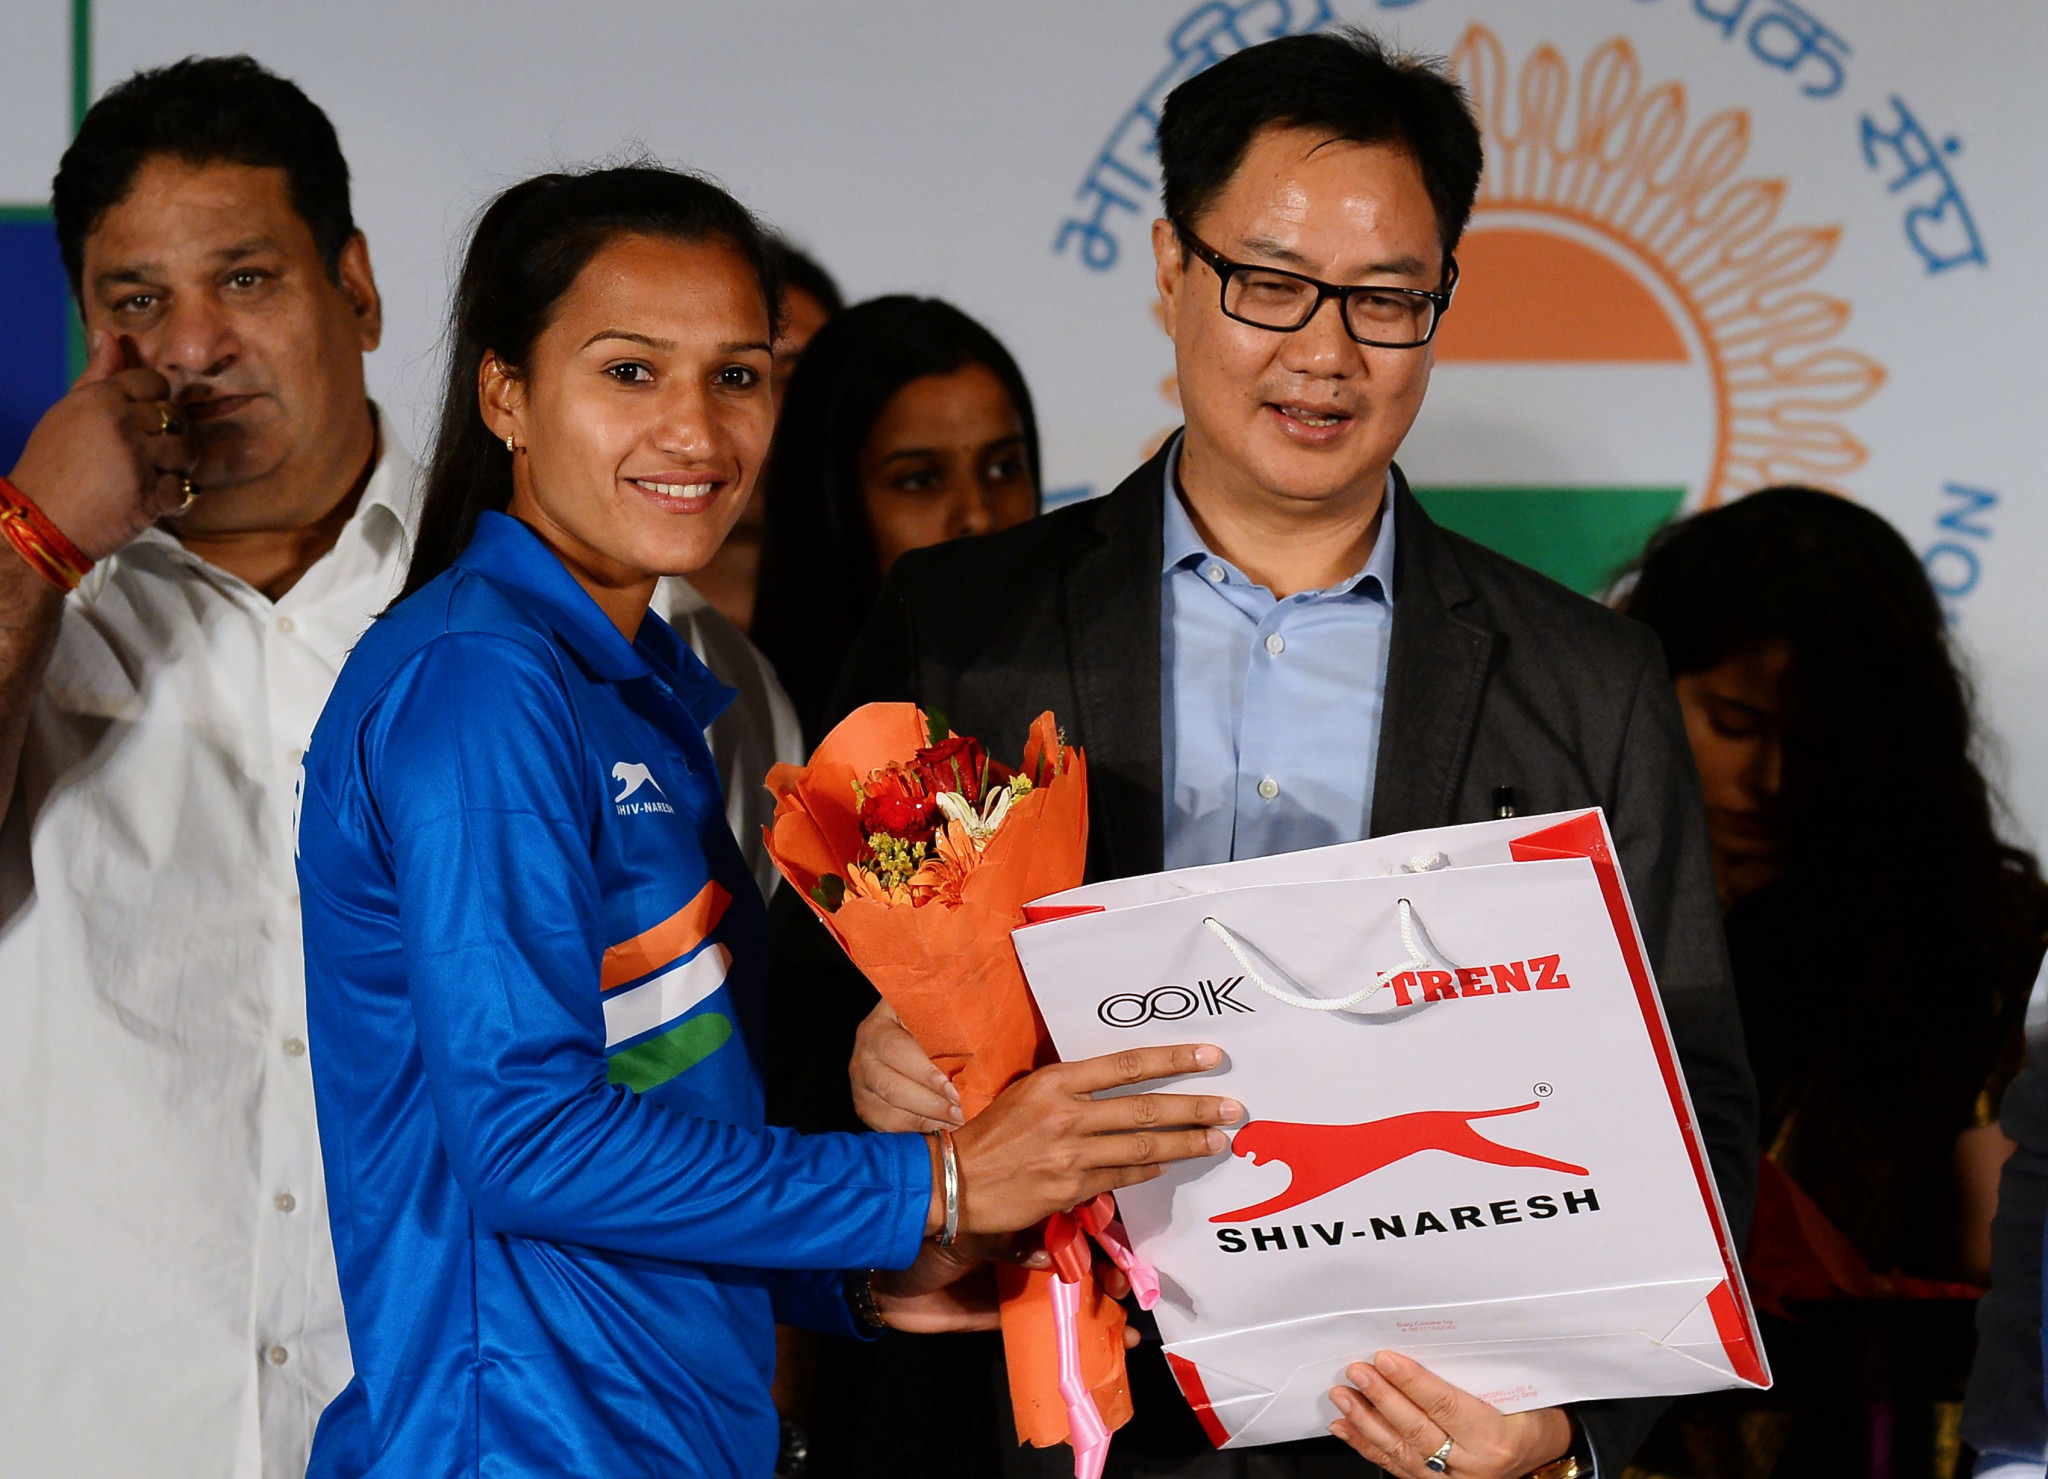 India House will be set up during the Tokyo 2020 Olympics to cater to athletes' nutritional needs, India's Sports Minister Kiren Rijiju, right, has said ©Getty Images